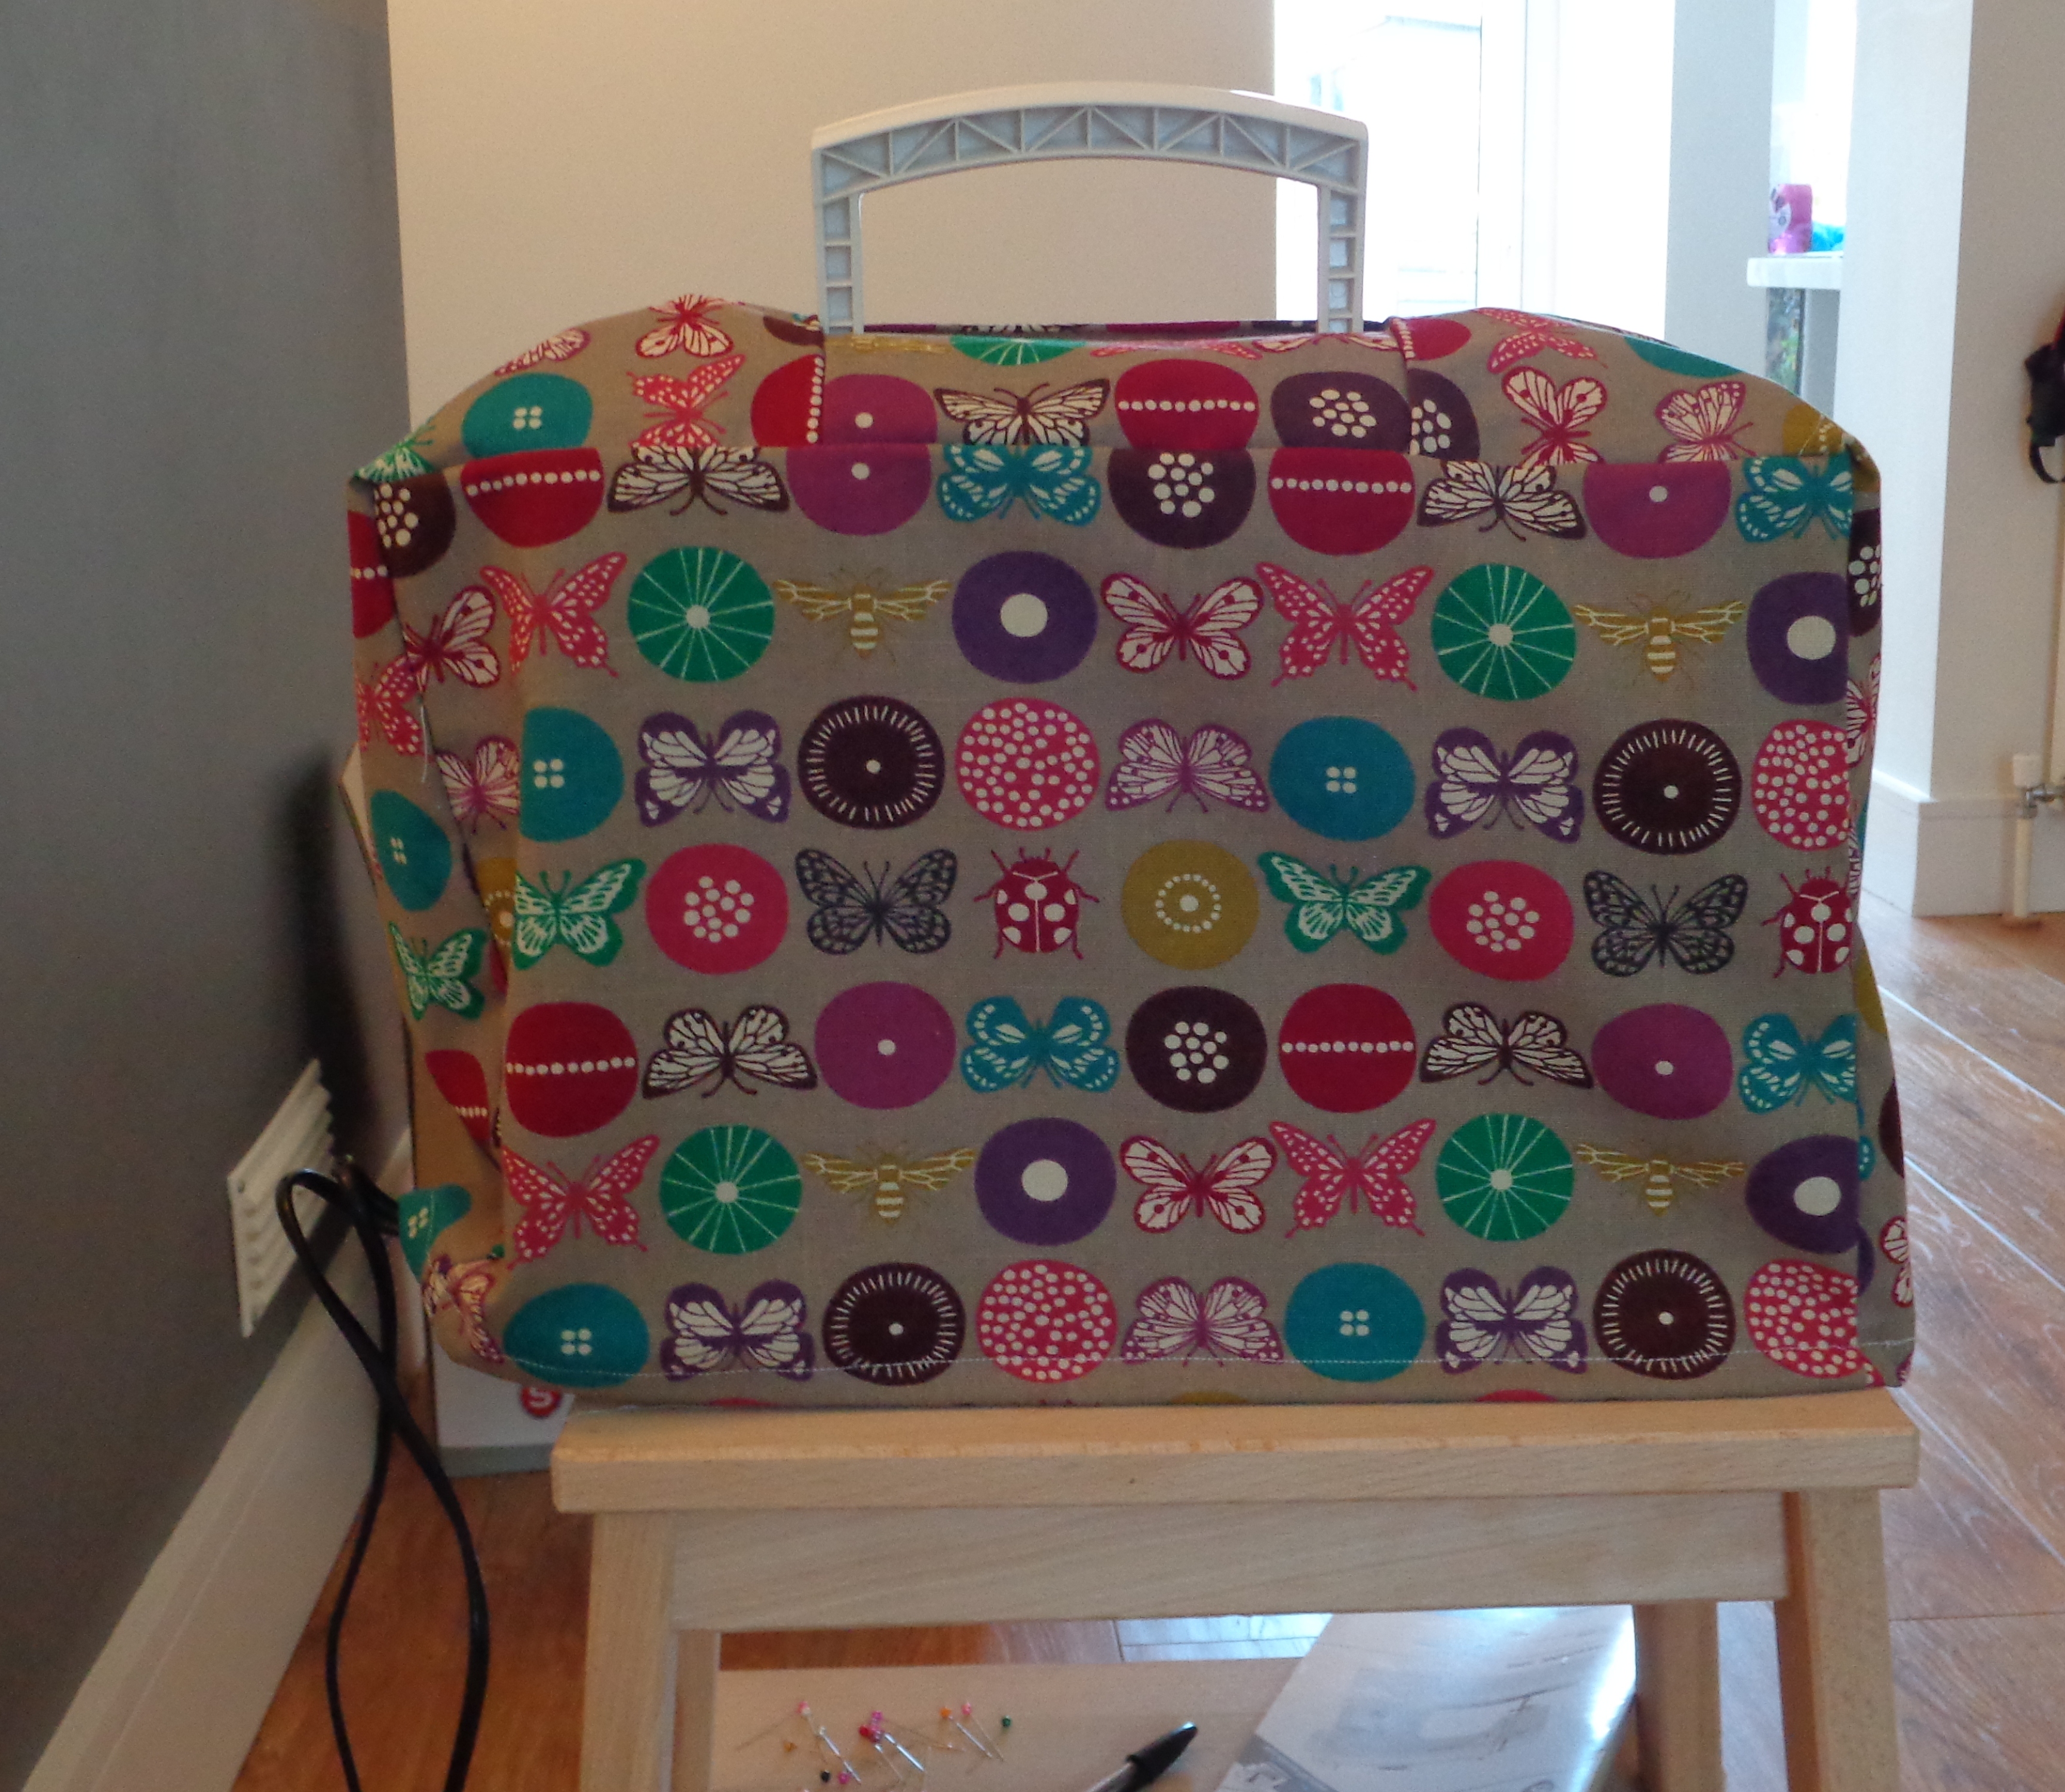 Cath Kidston's sewing machine cover 